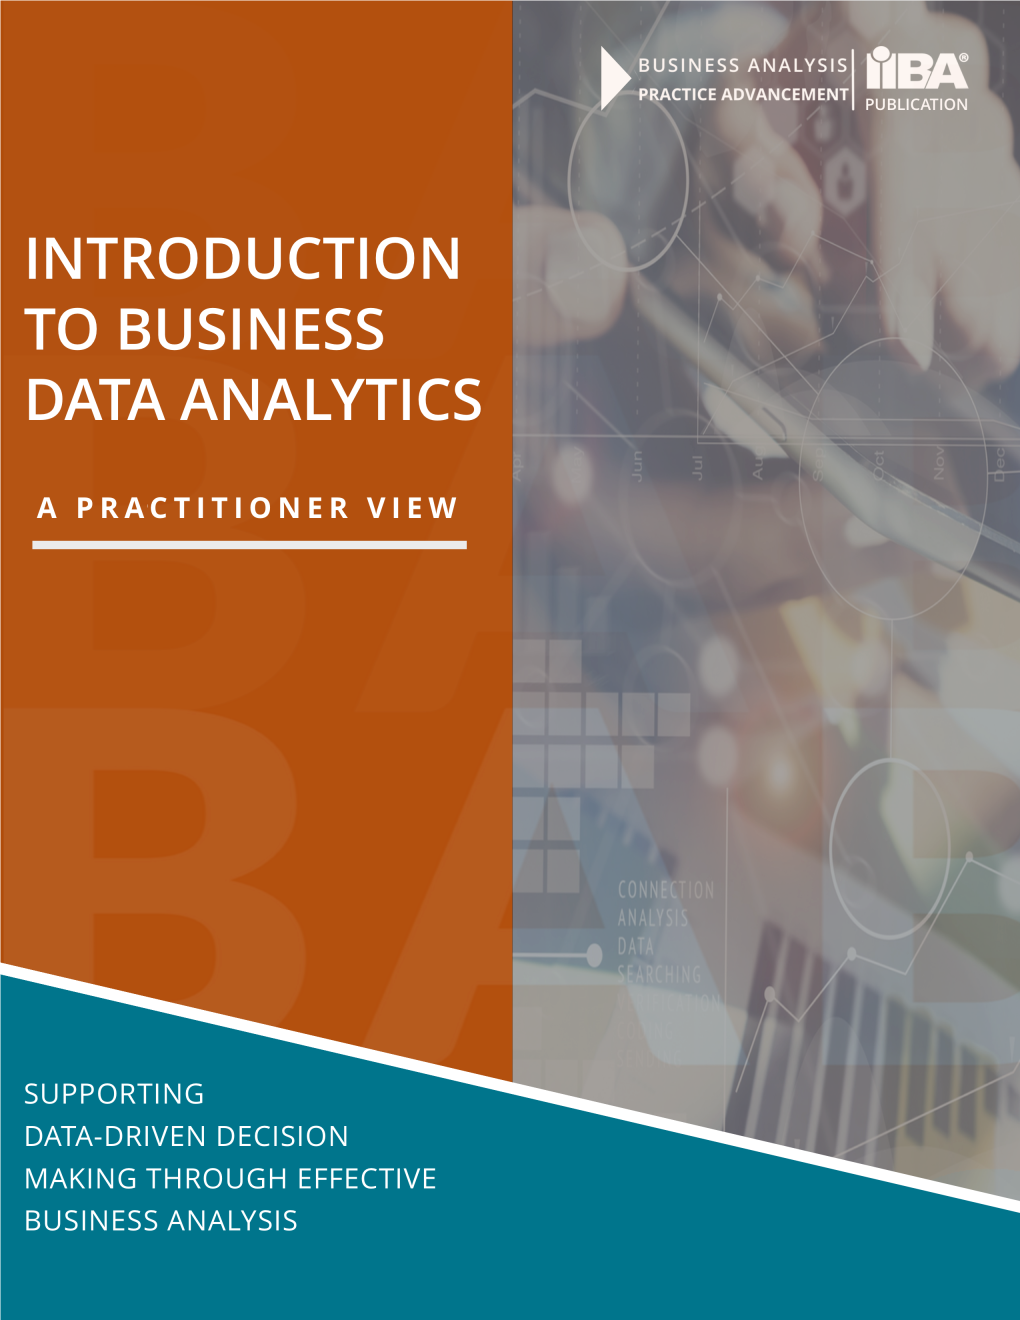 Introduction to Business Data Analytics: a Practitioner View